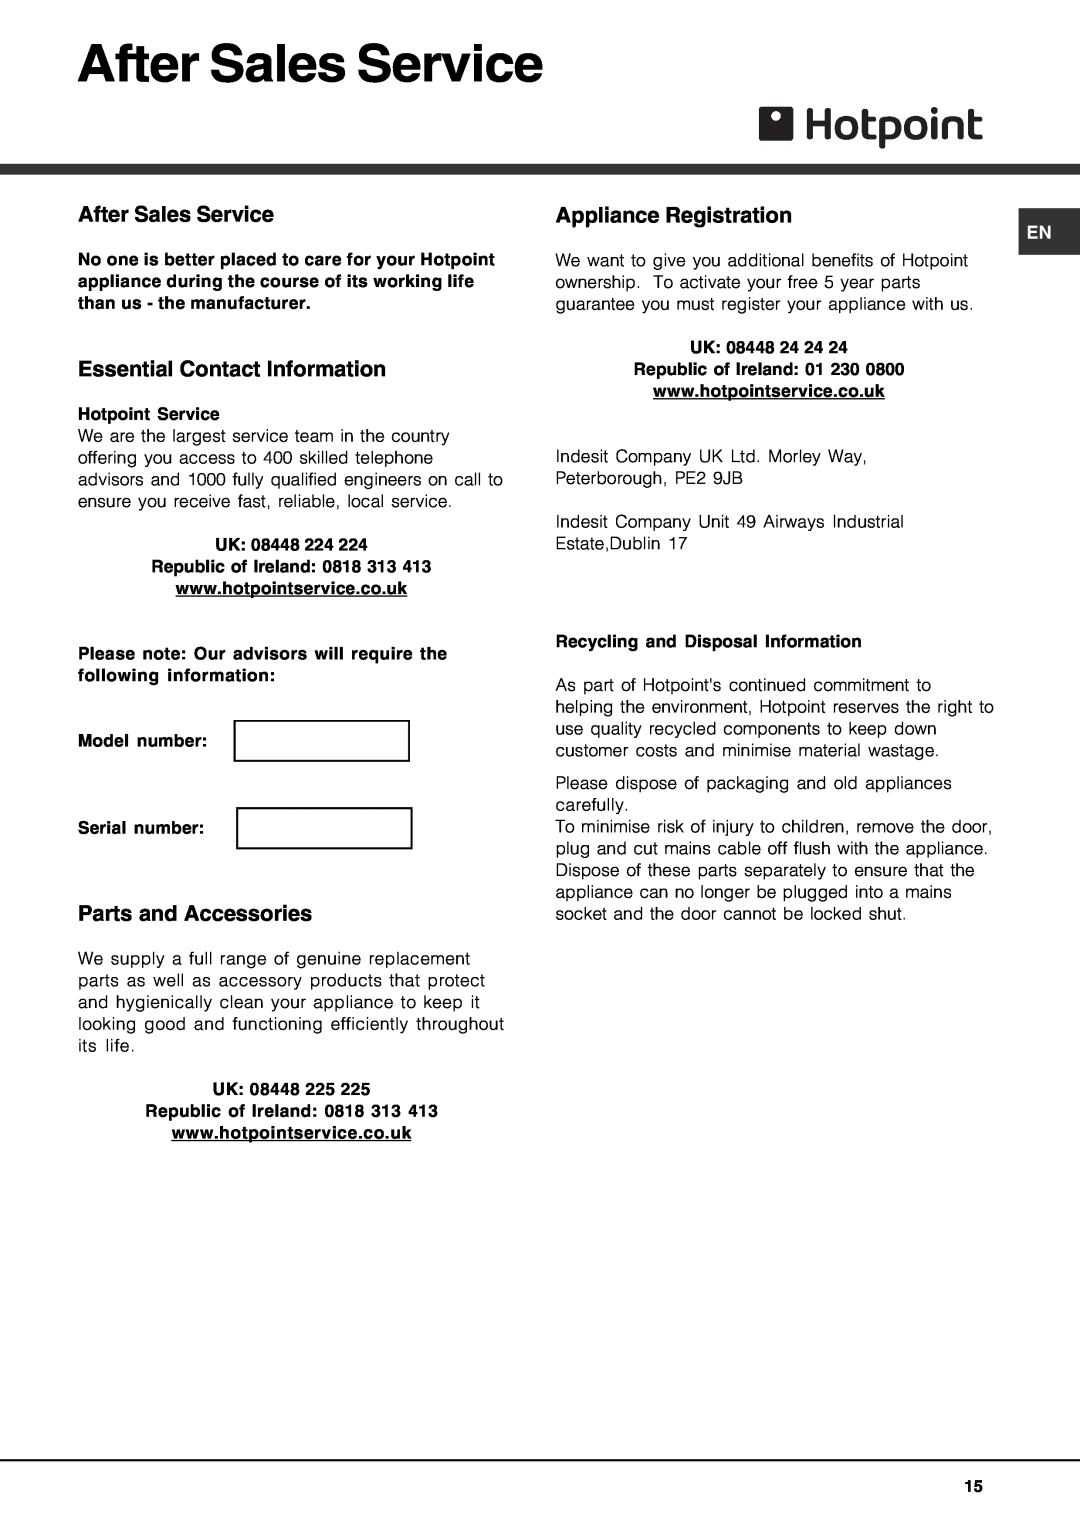 Hotpoint FDPF 481 manual After Sales Service, Essential Contact Information, Parts and Accessories, Appliance Registration 